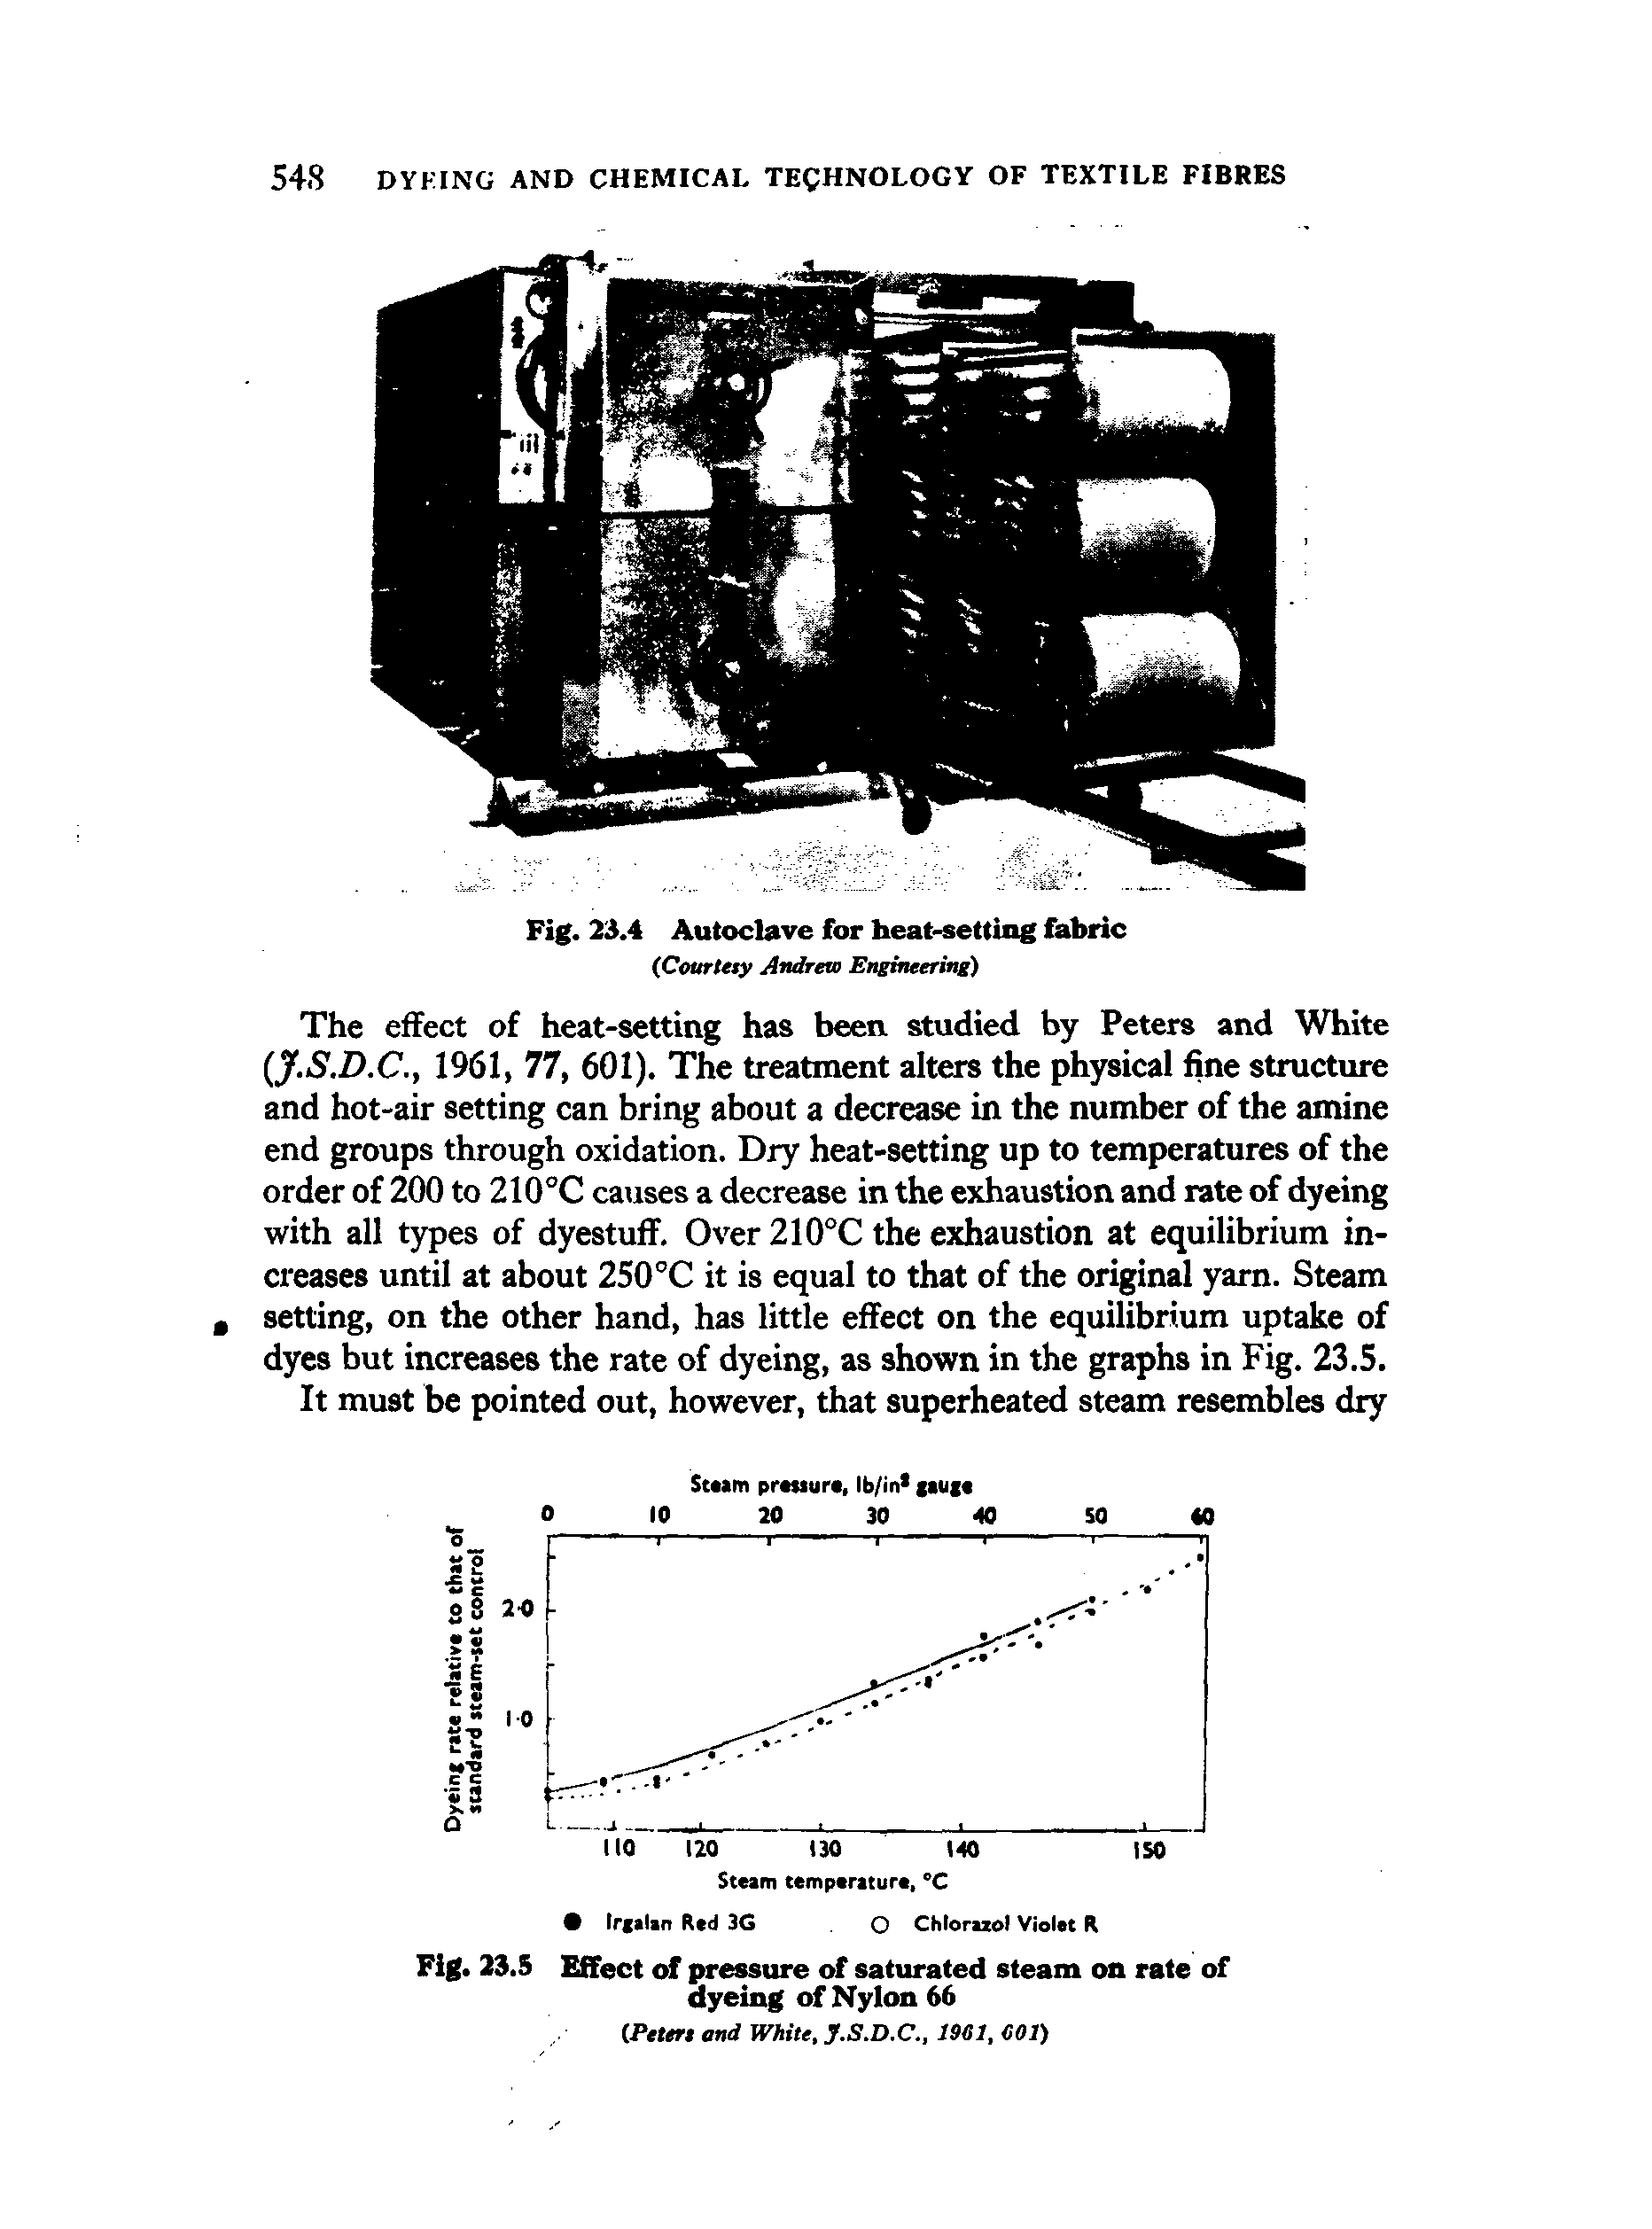 Fig. 23.5 Effect of pressure of saturated steam on rate of dyeing of Nylon 66 (Peters and White, J.S.D.C., mi, COI)...